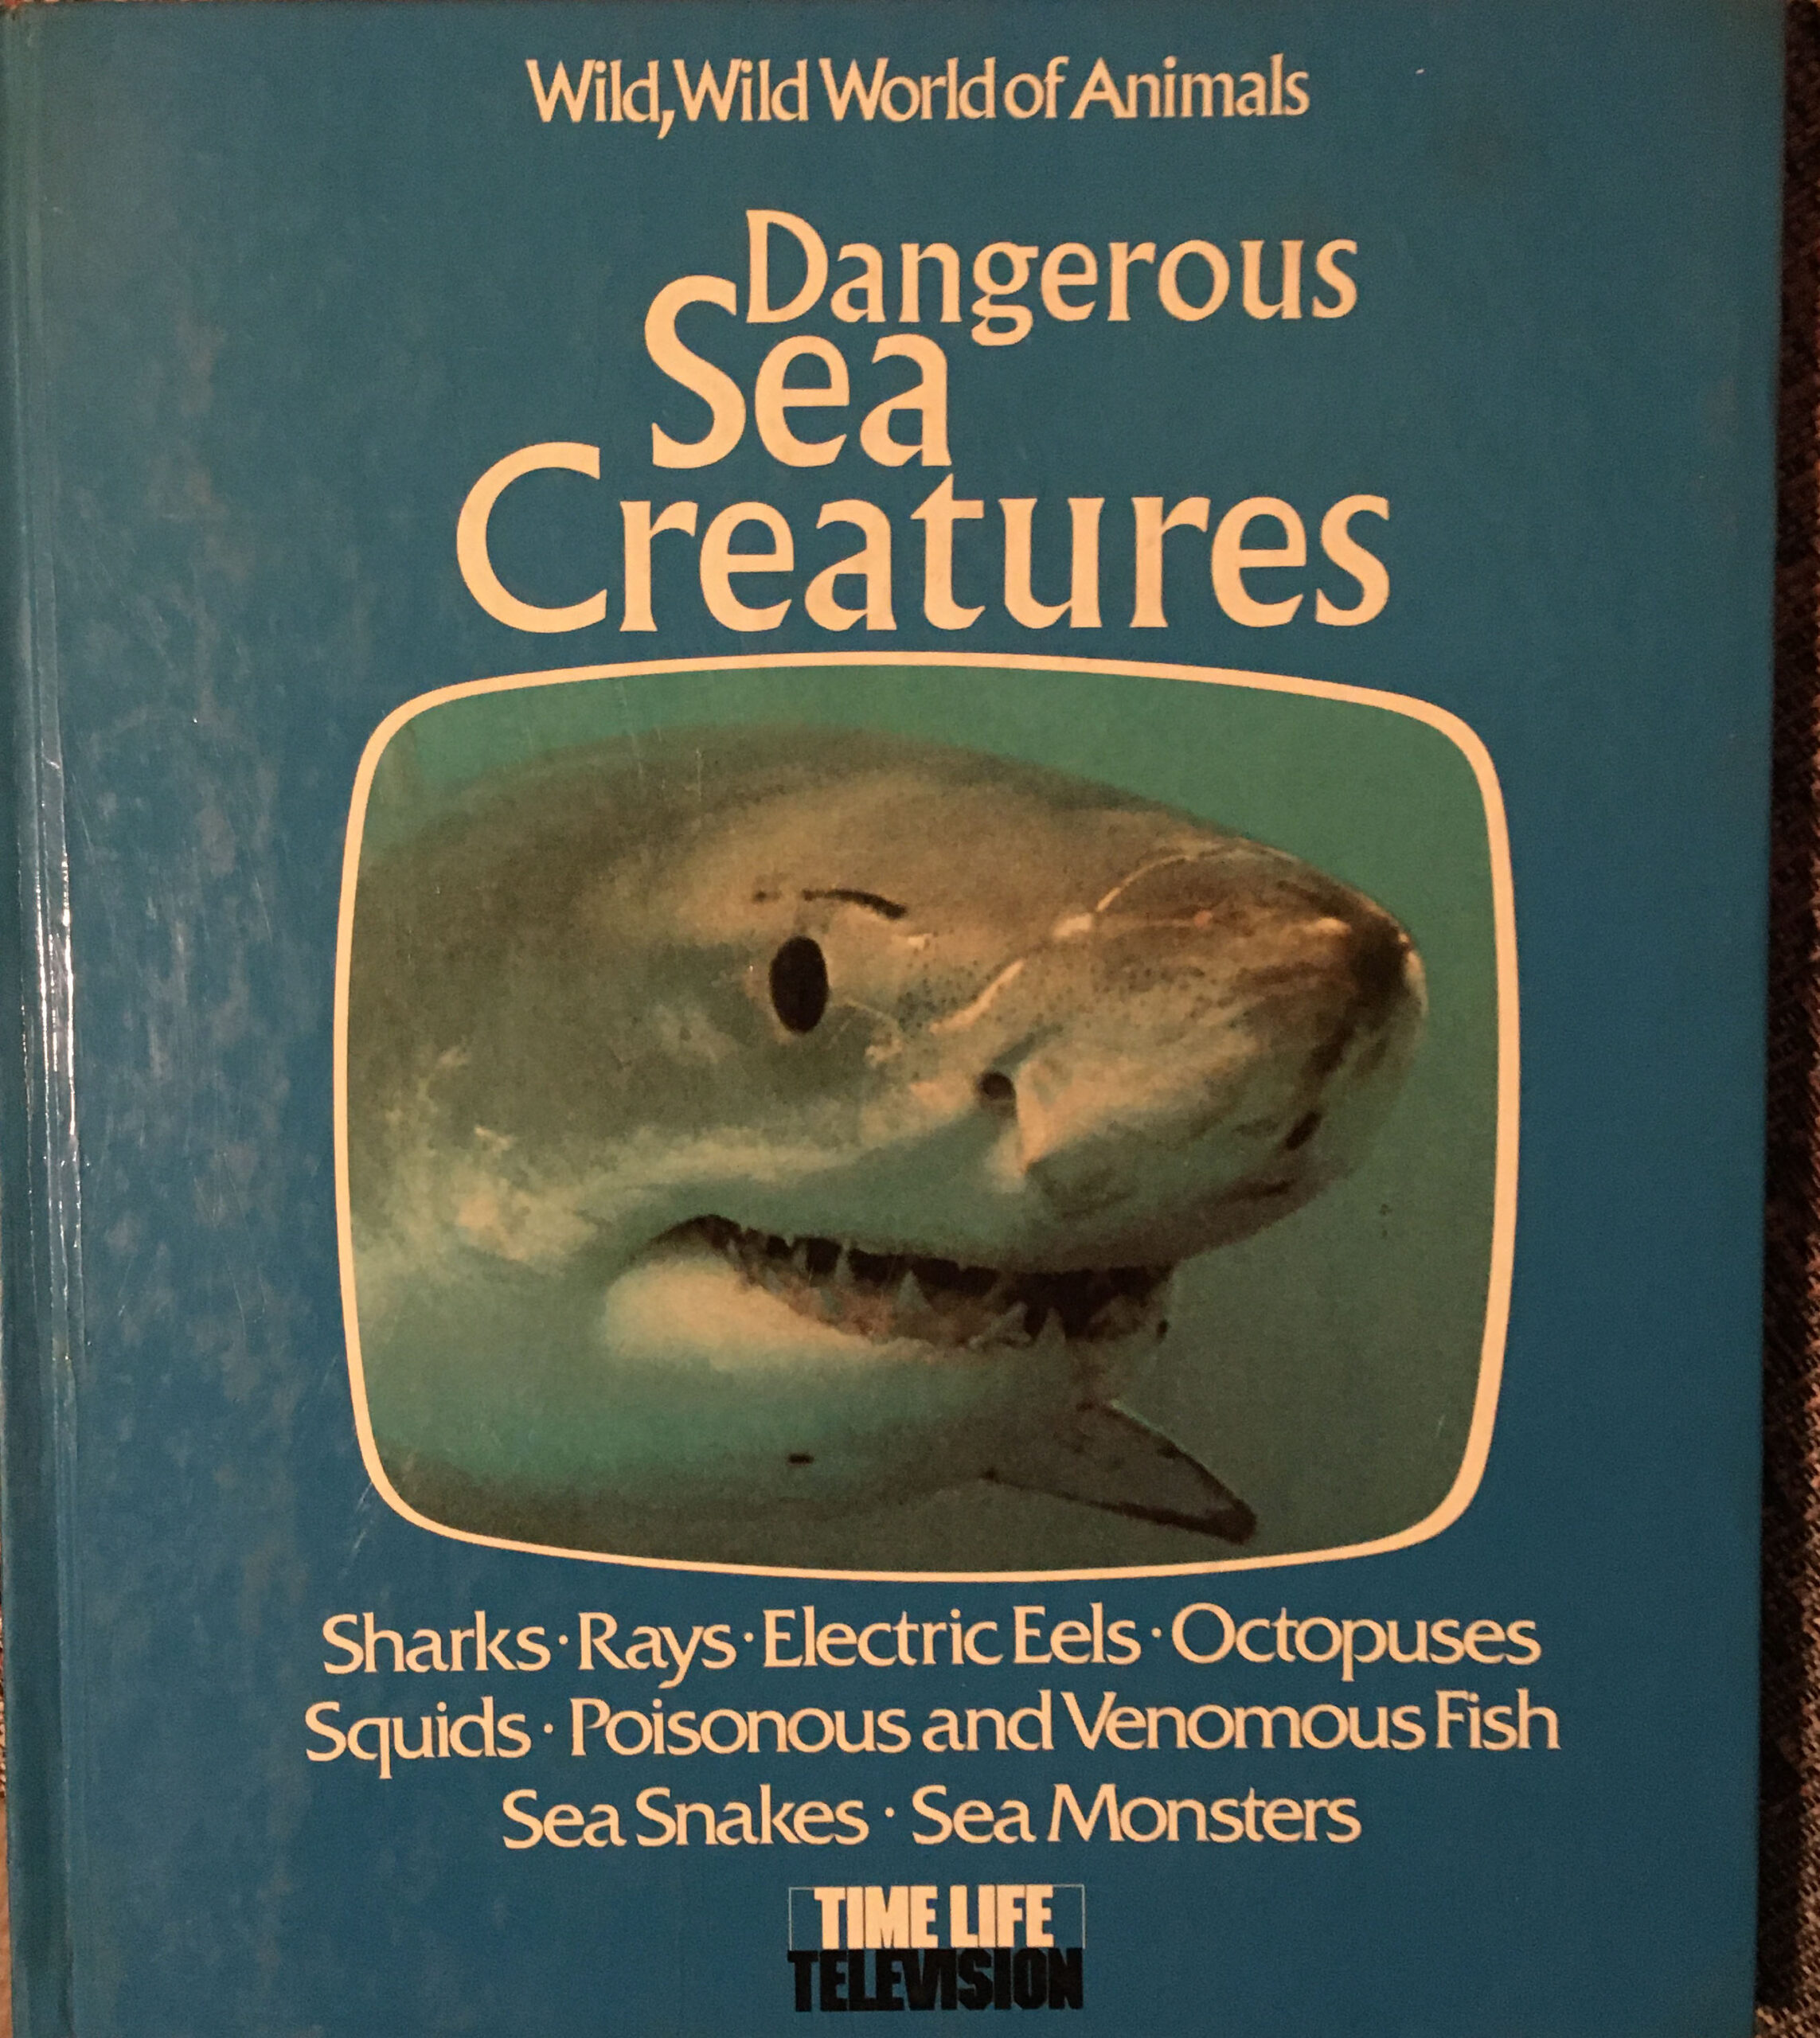 cover of the hardcover book "Dangerous Sea Creatures," part of the "Wild, Wild World of Animals" book series from Time-Life Books in the 1970s. The book is colored light blue and the lettering on it is white. At the very top reads "Wild, Wild World of Animals." Below that is the title "Dangerous Sea Creatures." Right below that is a photo of a great white shark within a TV screen-shaped box. Below that is a list of some of the creatures found in the book: "Sharks Rays Electric Eels. Octopuses. Squids. Poisonous and Venomous Fish. Sea Snakes. Sea Monsters." Right below that is the logo for the publisher, Time-Life Television, who also produced the series on which the books were based.